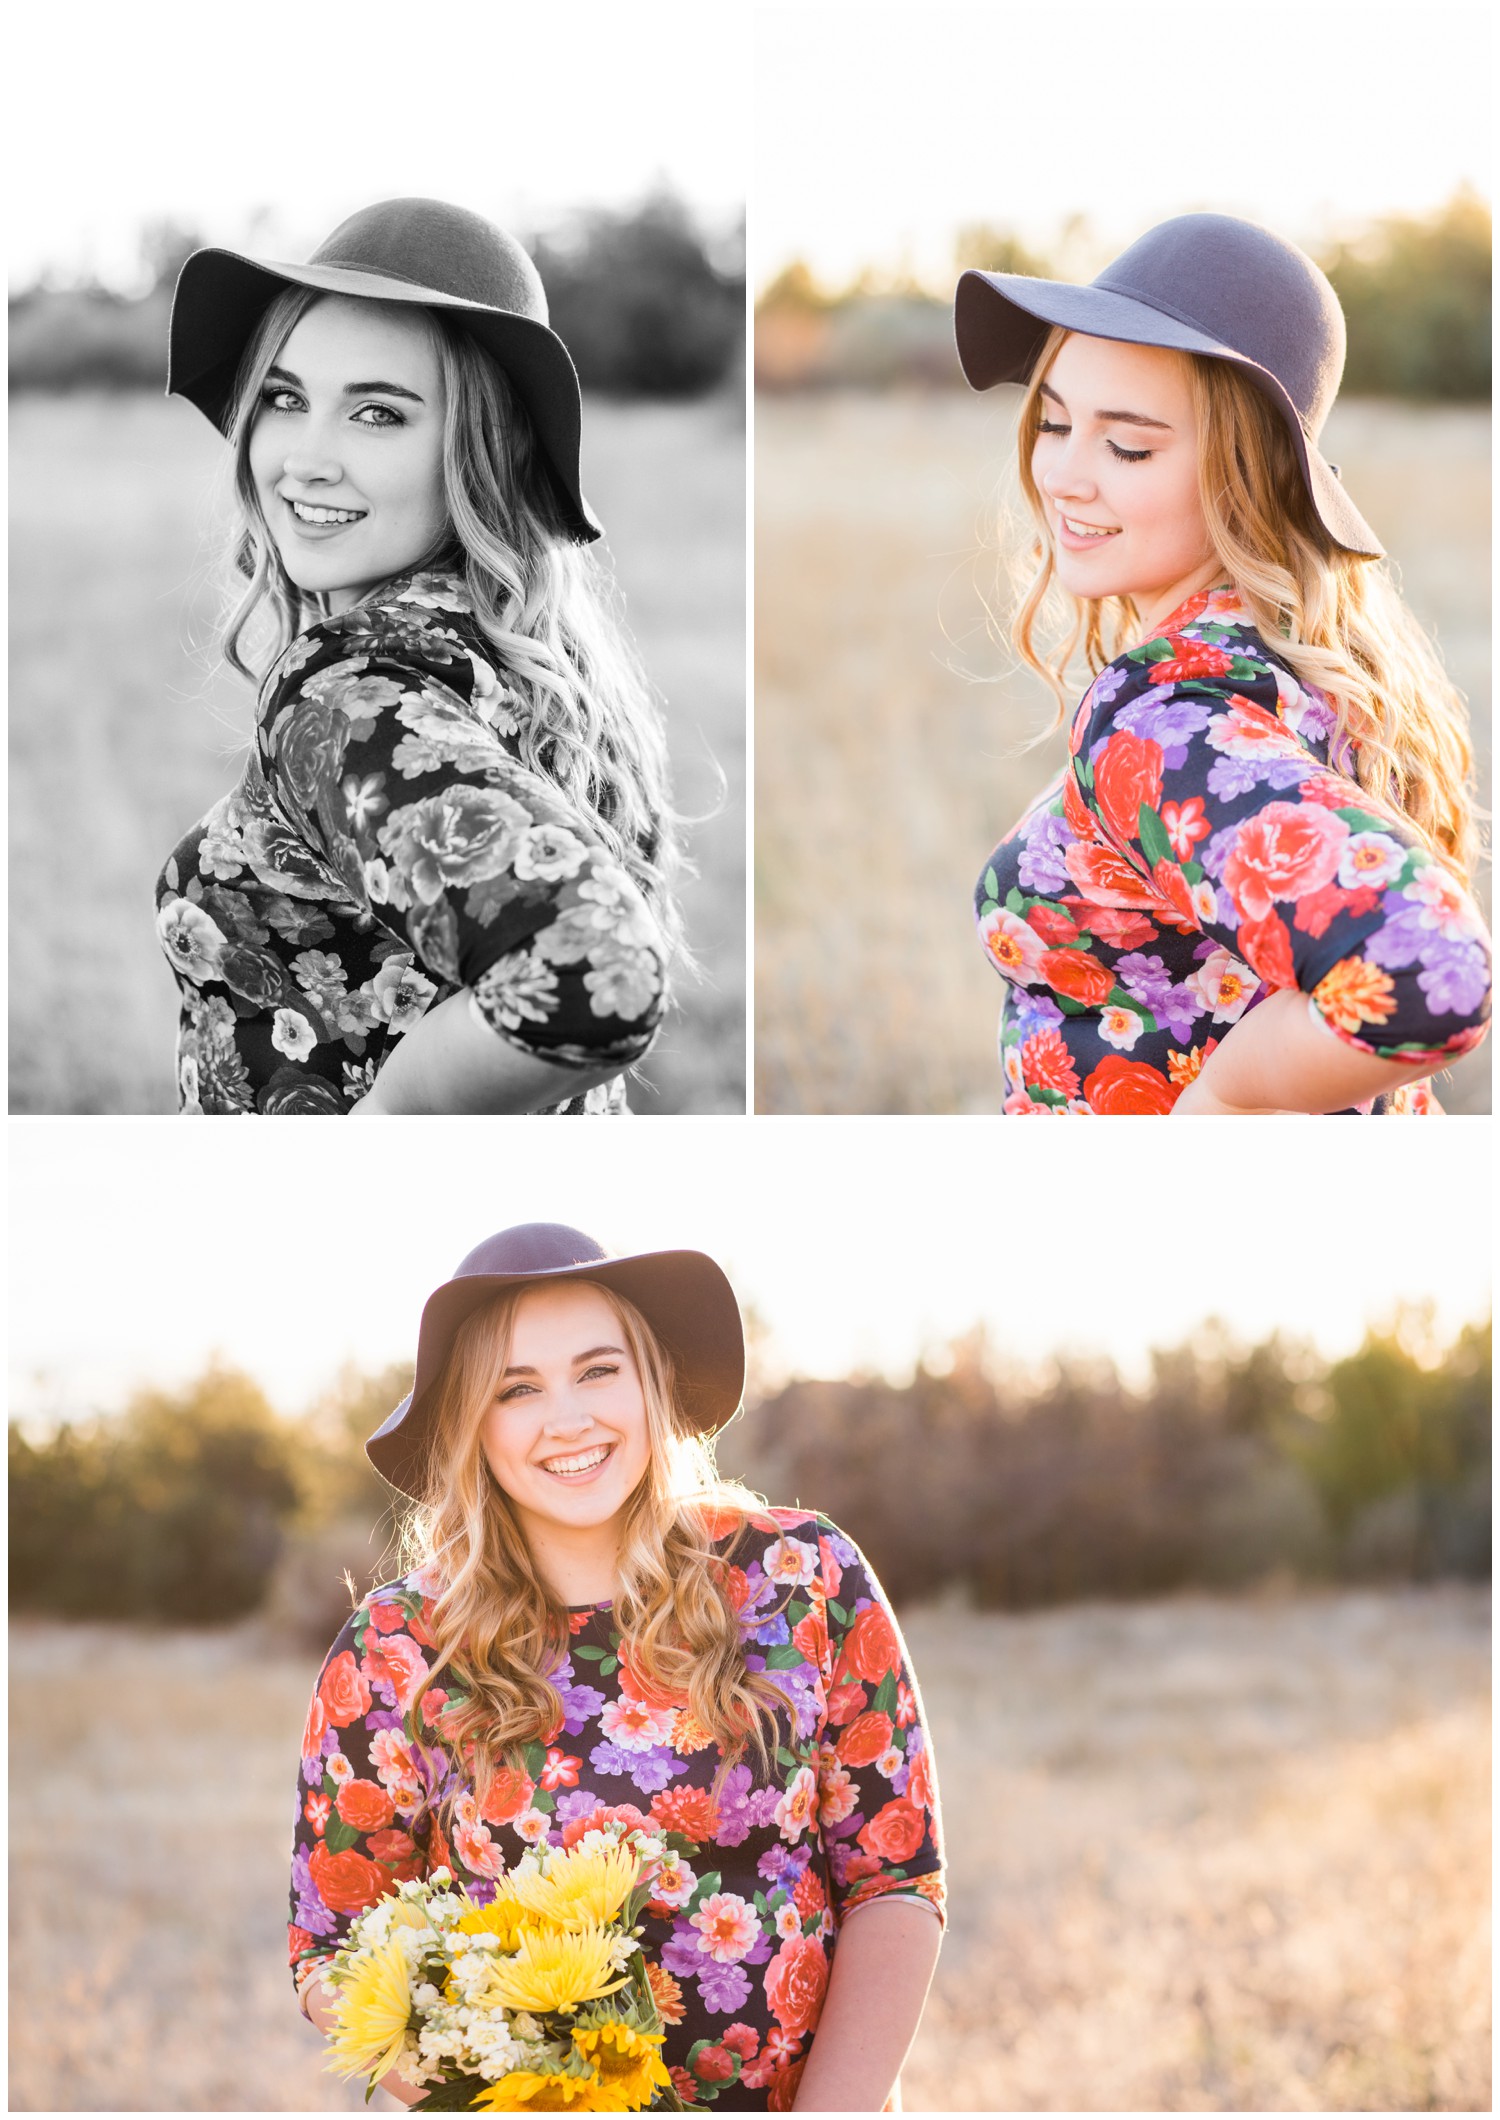  Late Summer senior portraits in floral dress and floppy hat 